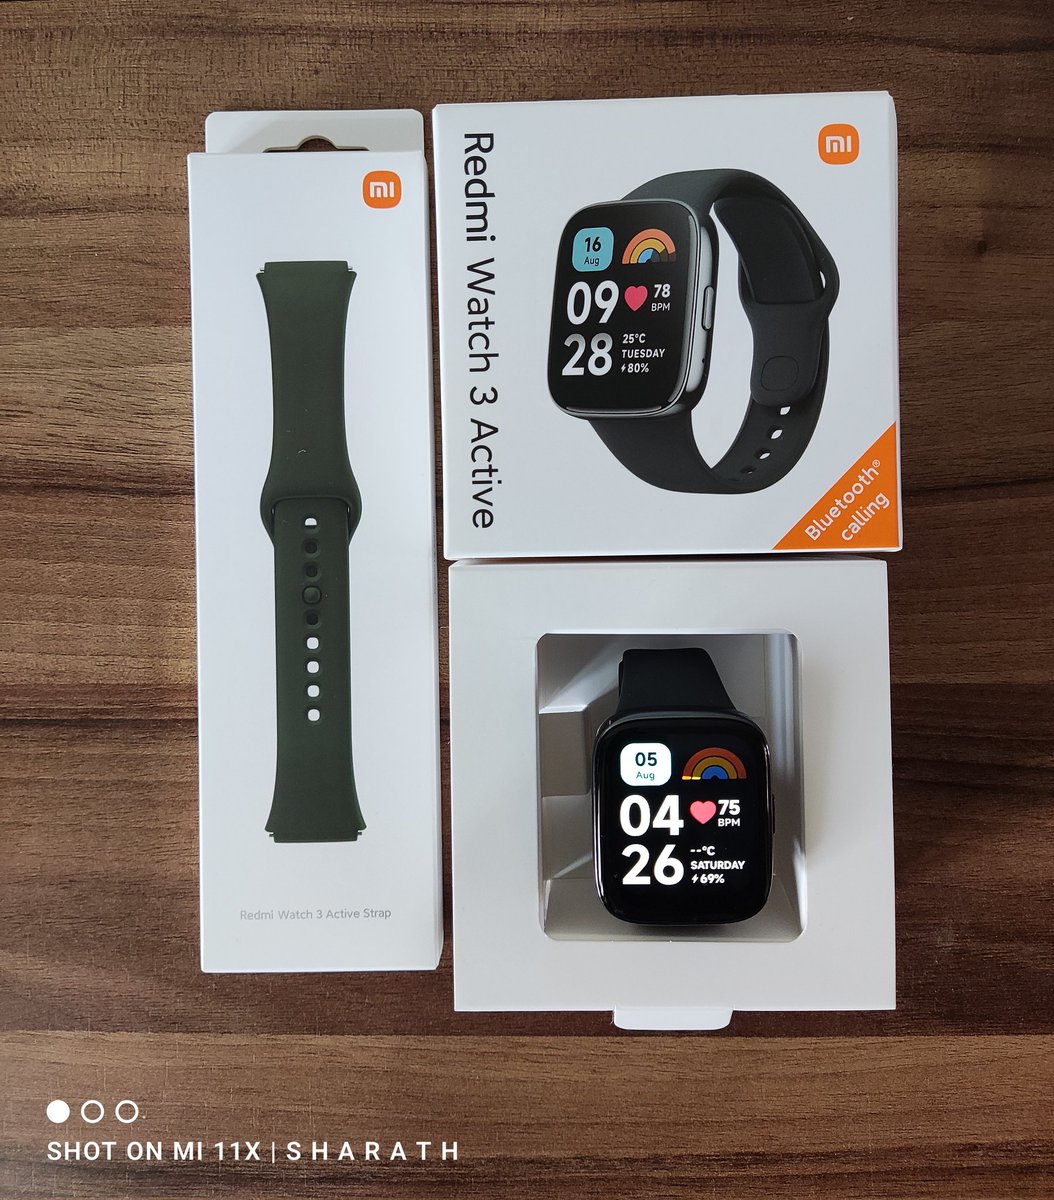 Neww one ❤️✨
 #RedmiWatch3Active ⌚